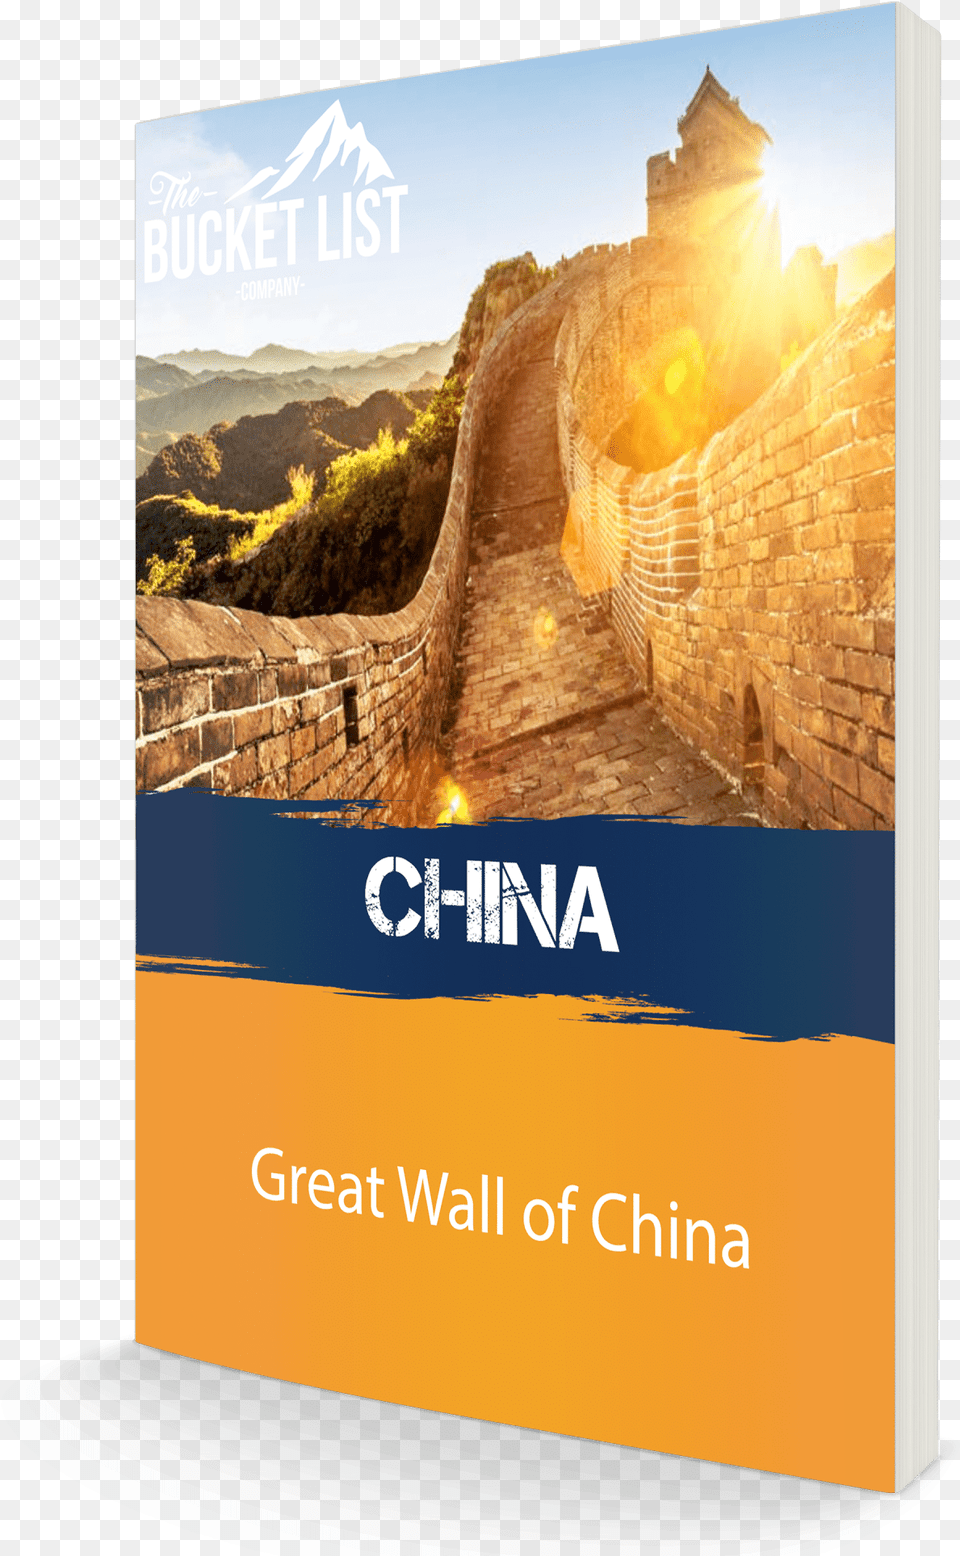 Download Our Guide To The Great Wall Of China Flyer, Advertisement, Poster Png Image